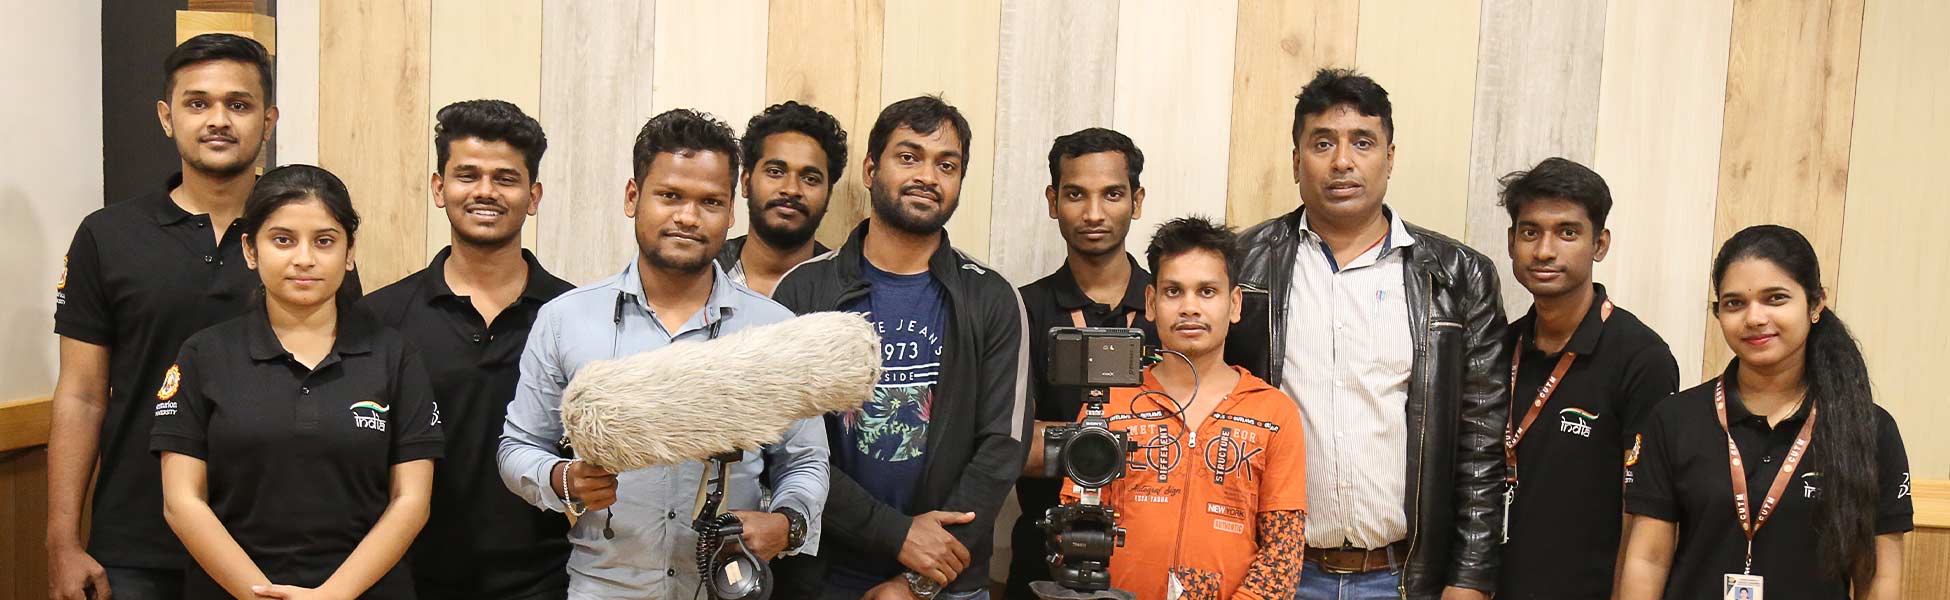 film production services in Balotra, video production services in Balotra, tv production services in Balotra, production services in Balotra